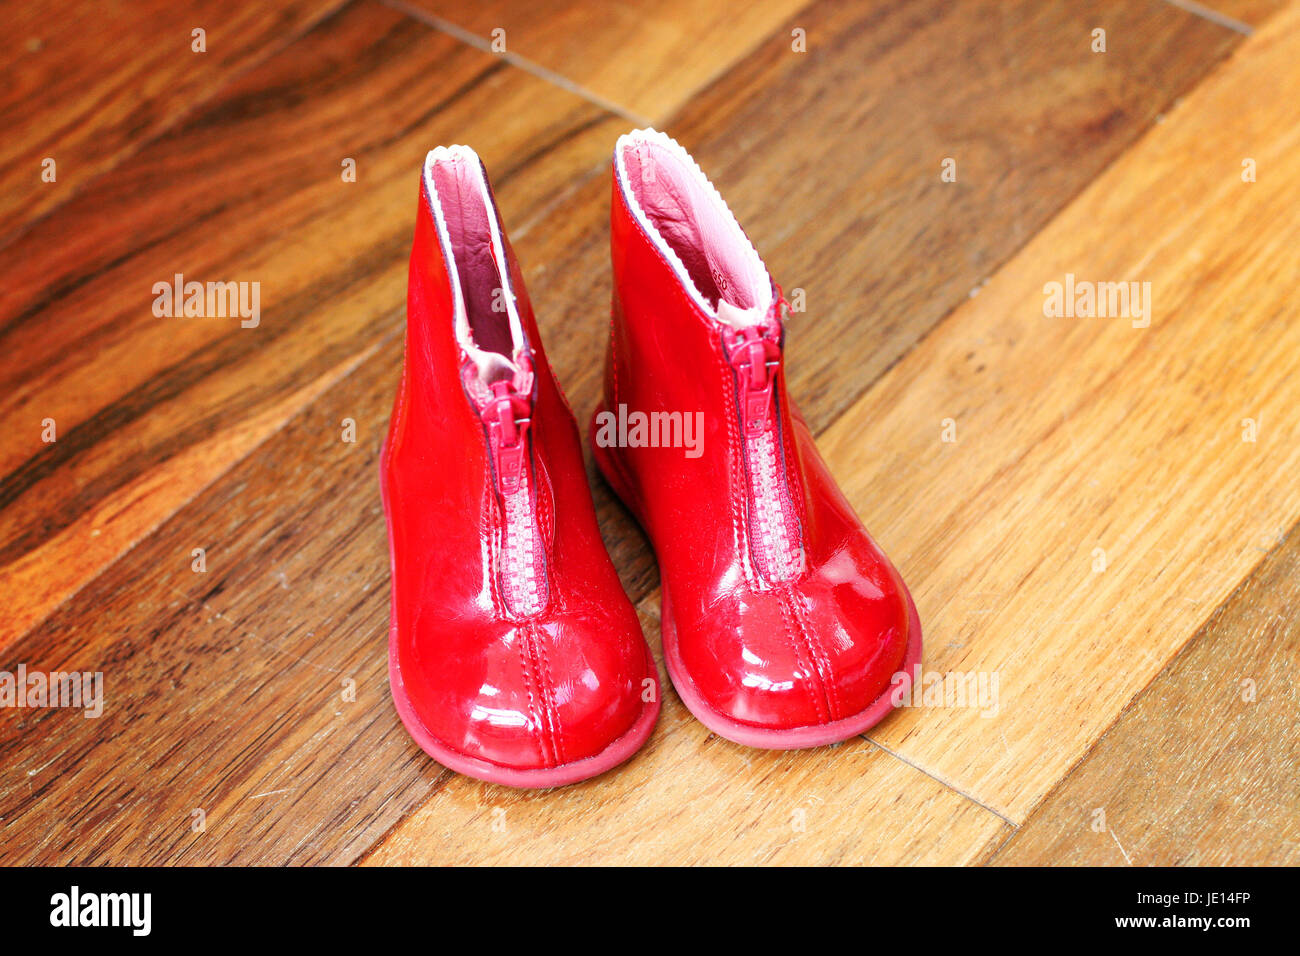 Little pair of red patent toddler boots with a zip up the front Stock Photo